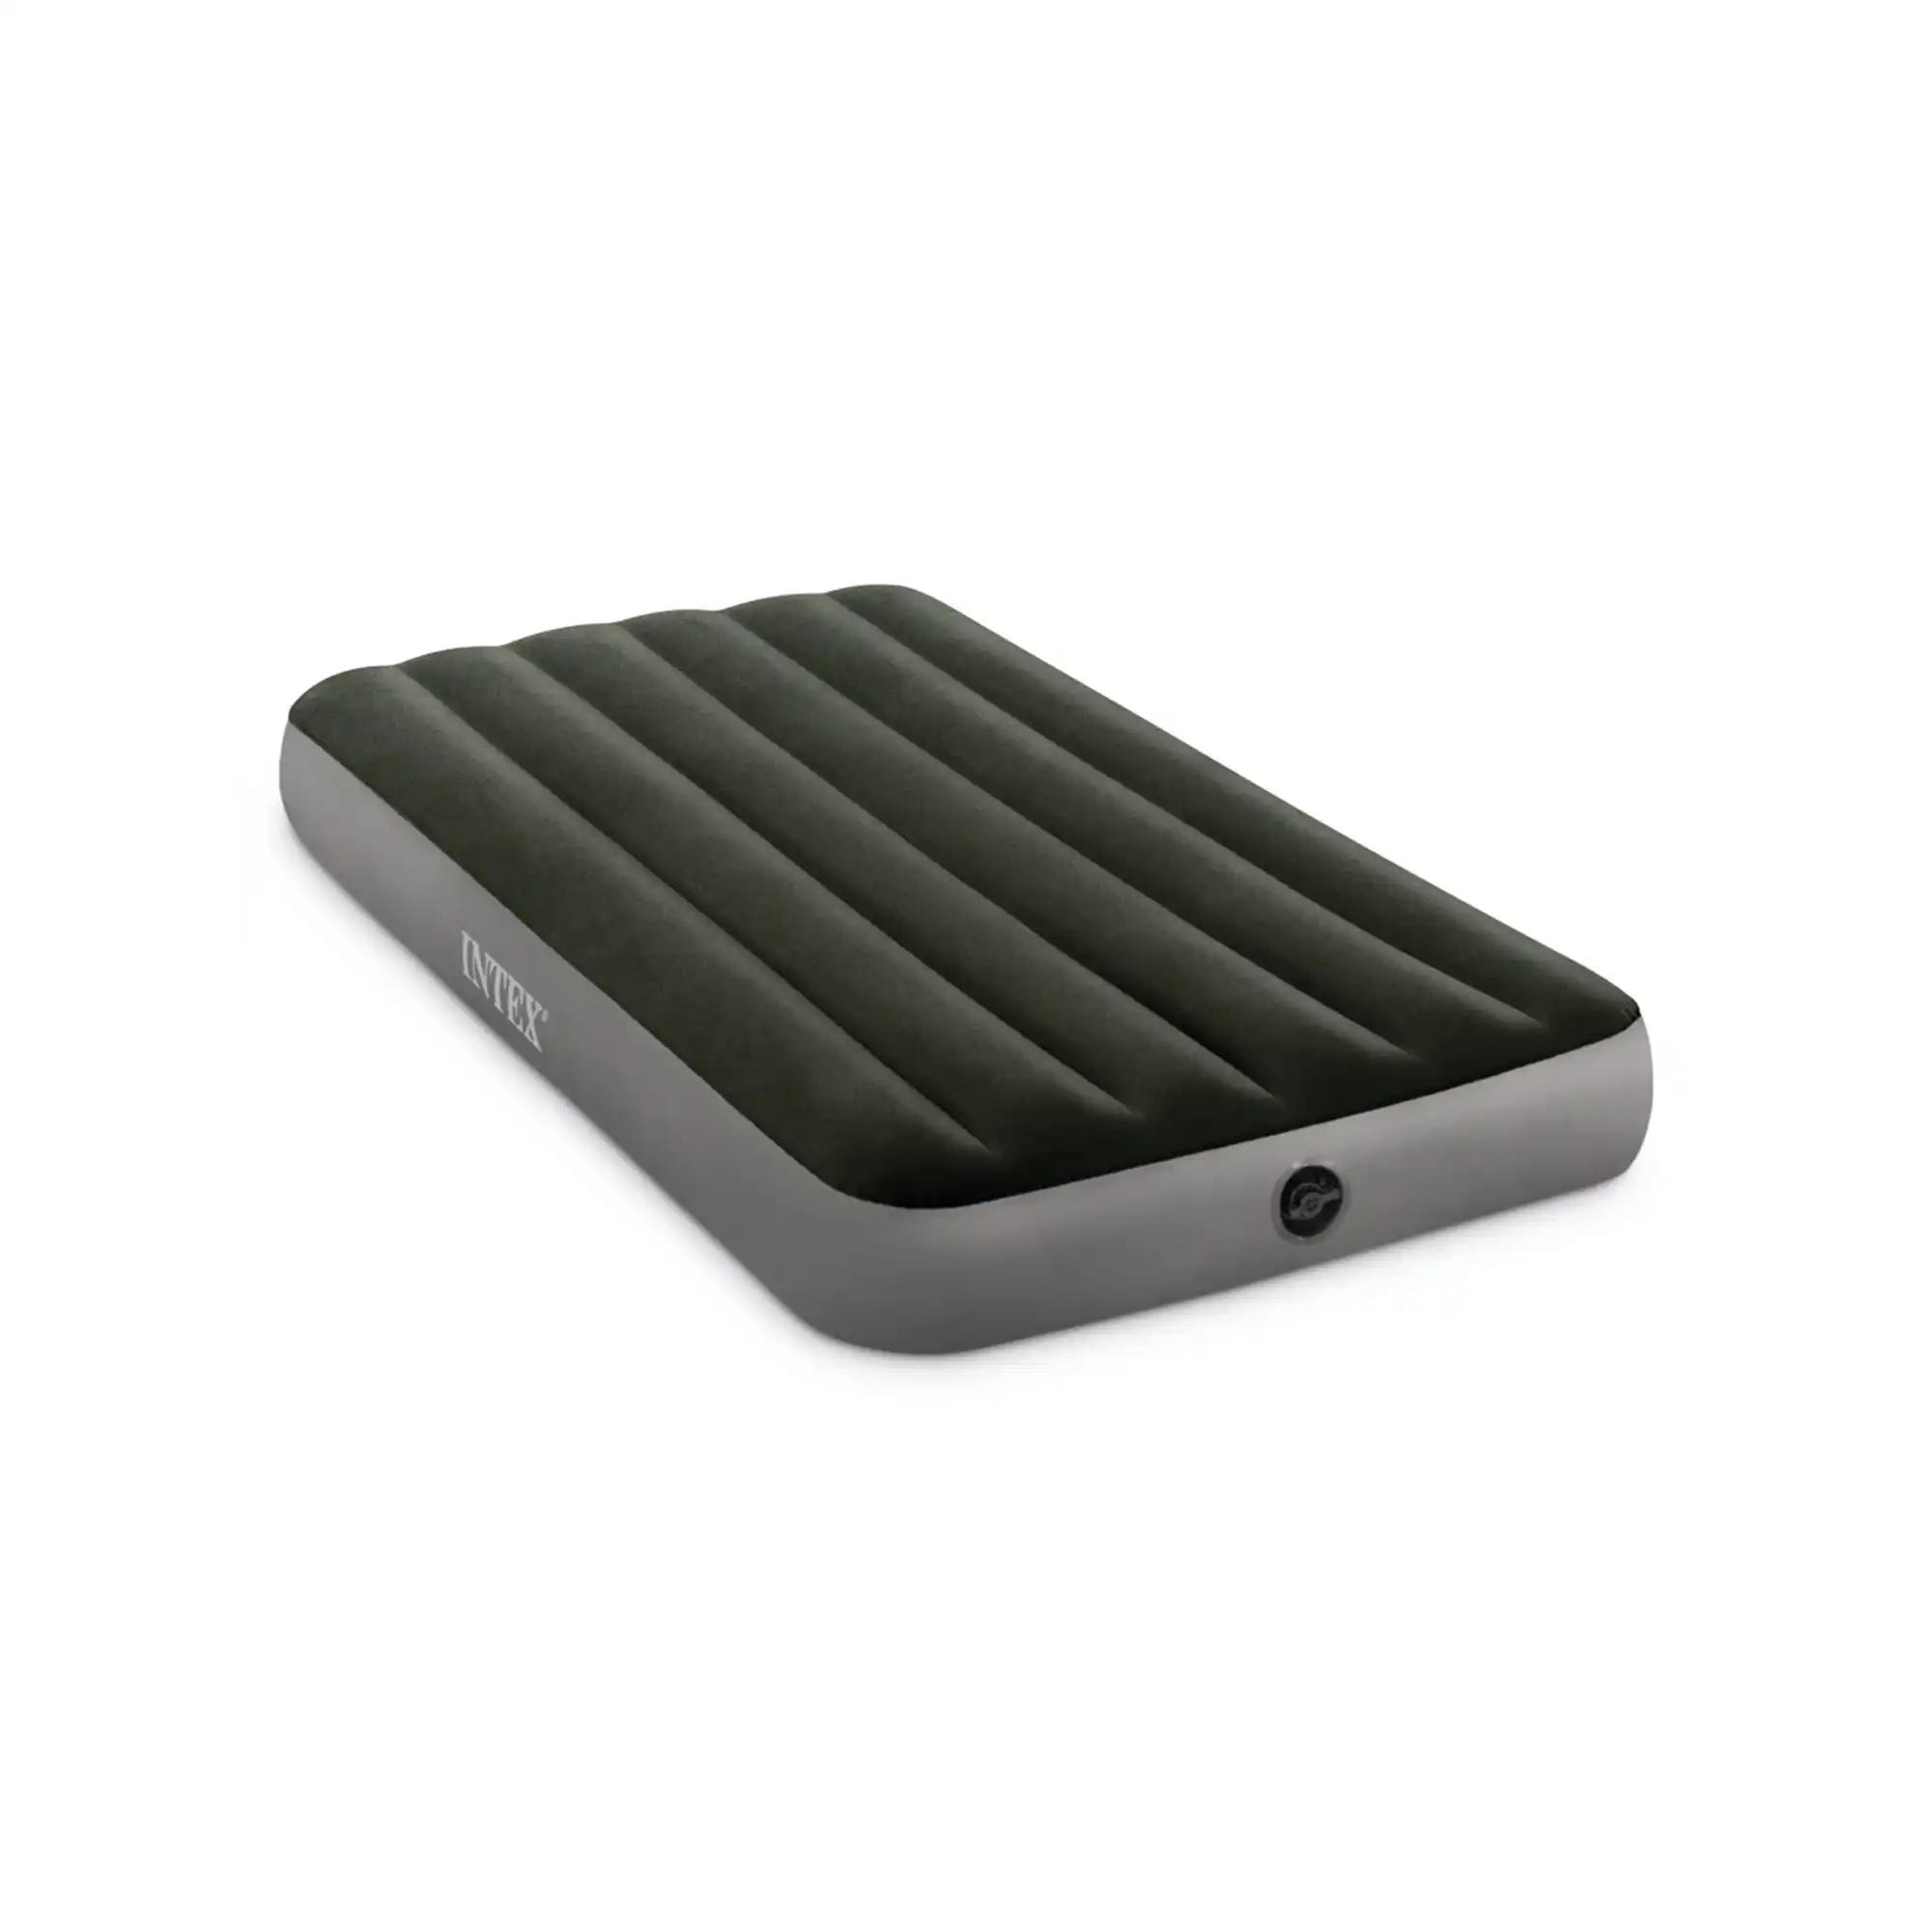 Twin Dura-Beam Prestige Airbed with Battery Pump